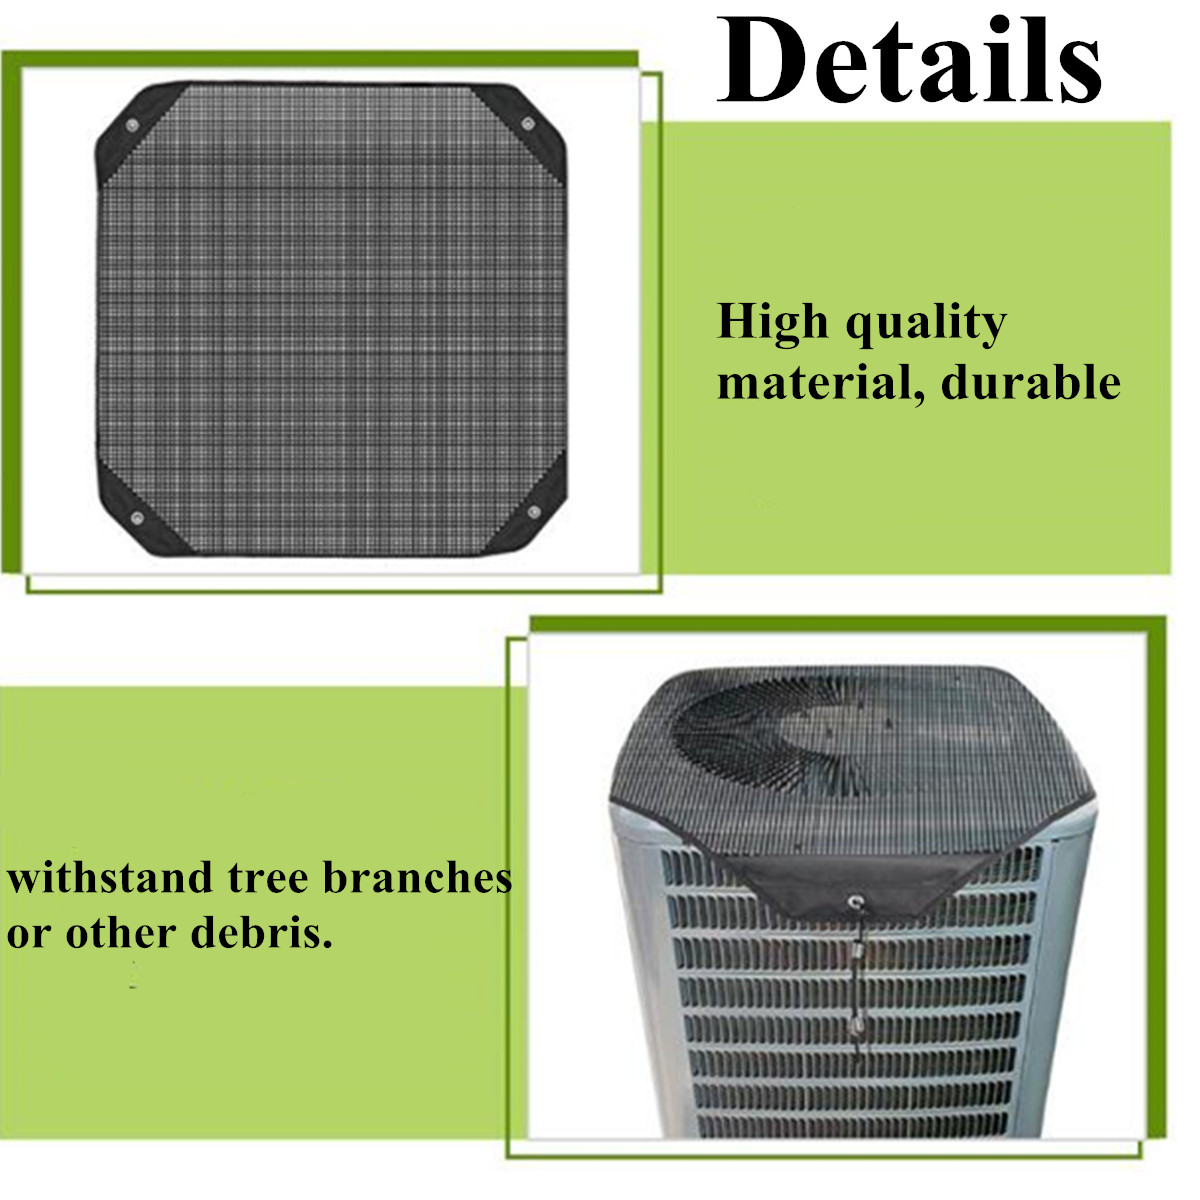 Air-Conditioner-Cover-Outdoor-Mesh-Waterproof-Oxford-Cloth-Protective-Cover-Dust-Net-Cooling-Fan-Cov-1560410-7